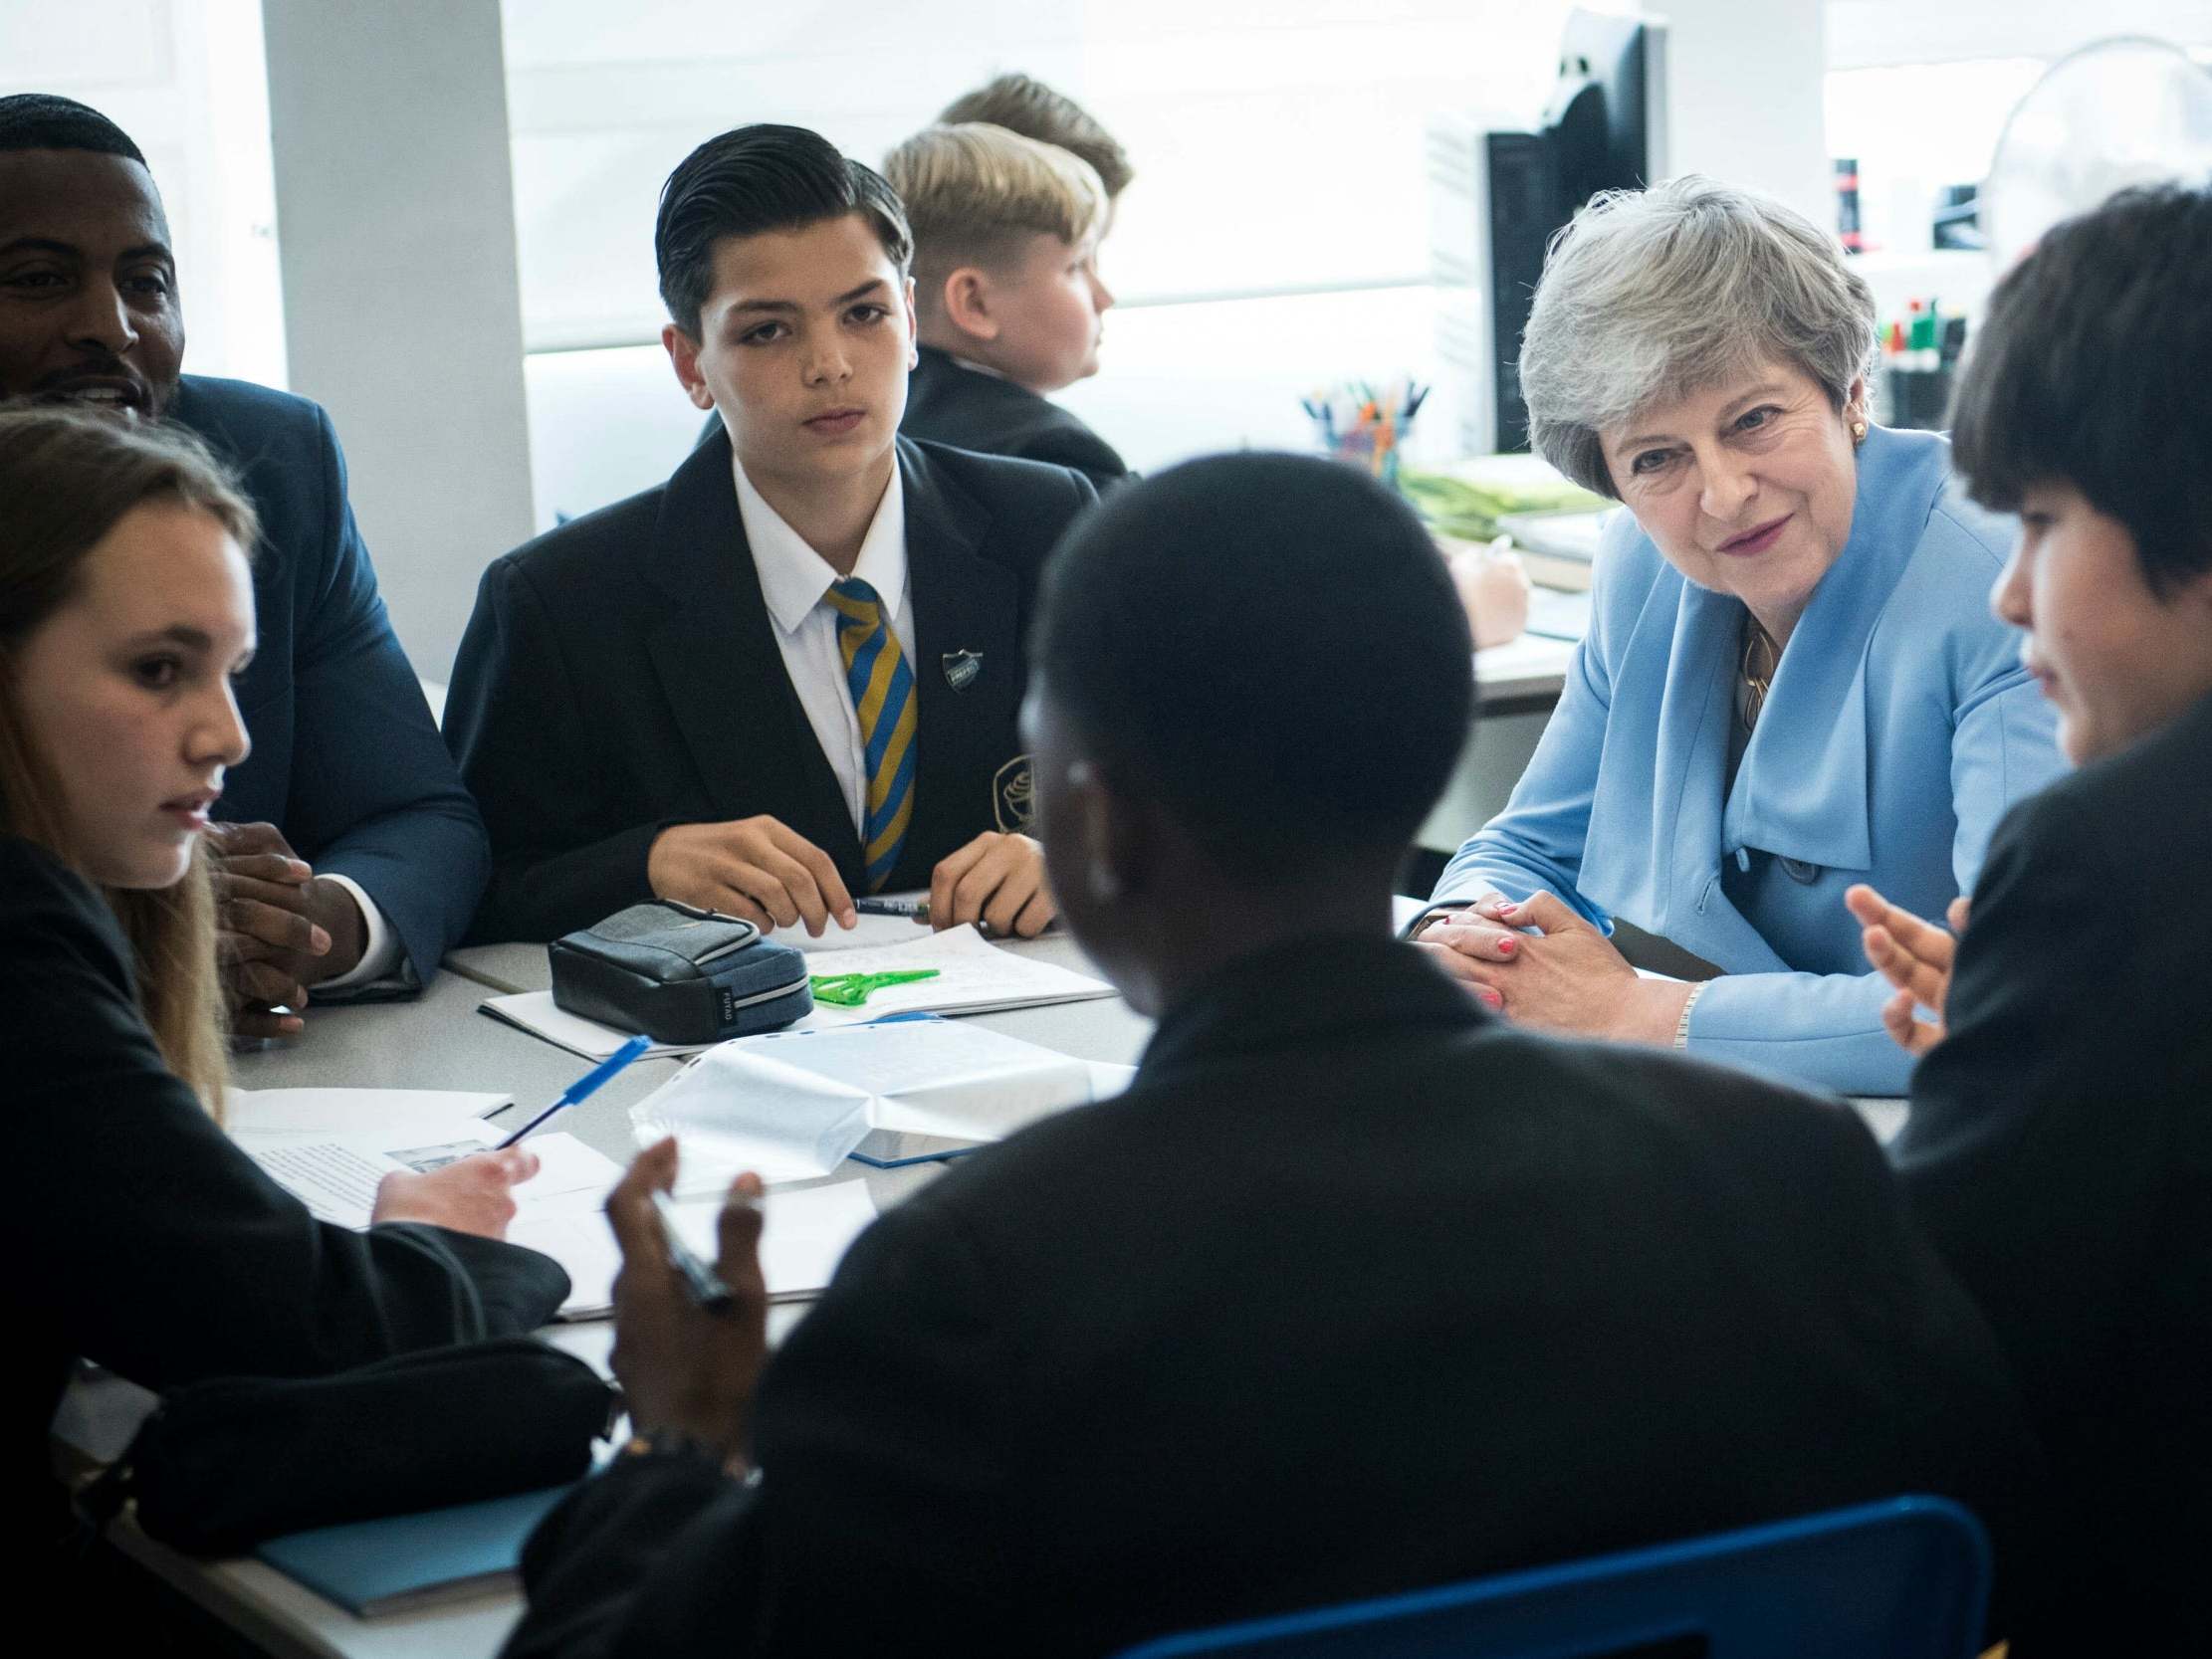 Theresa May discusses mental health with pupils at a school in London